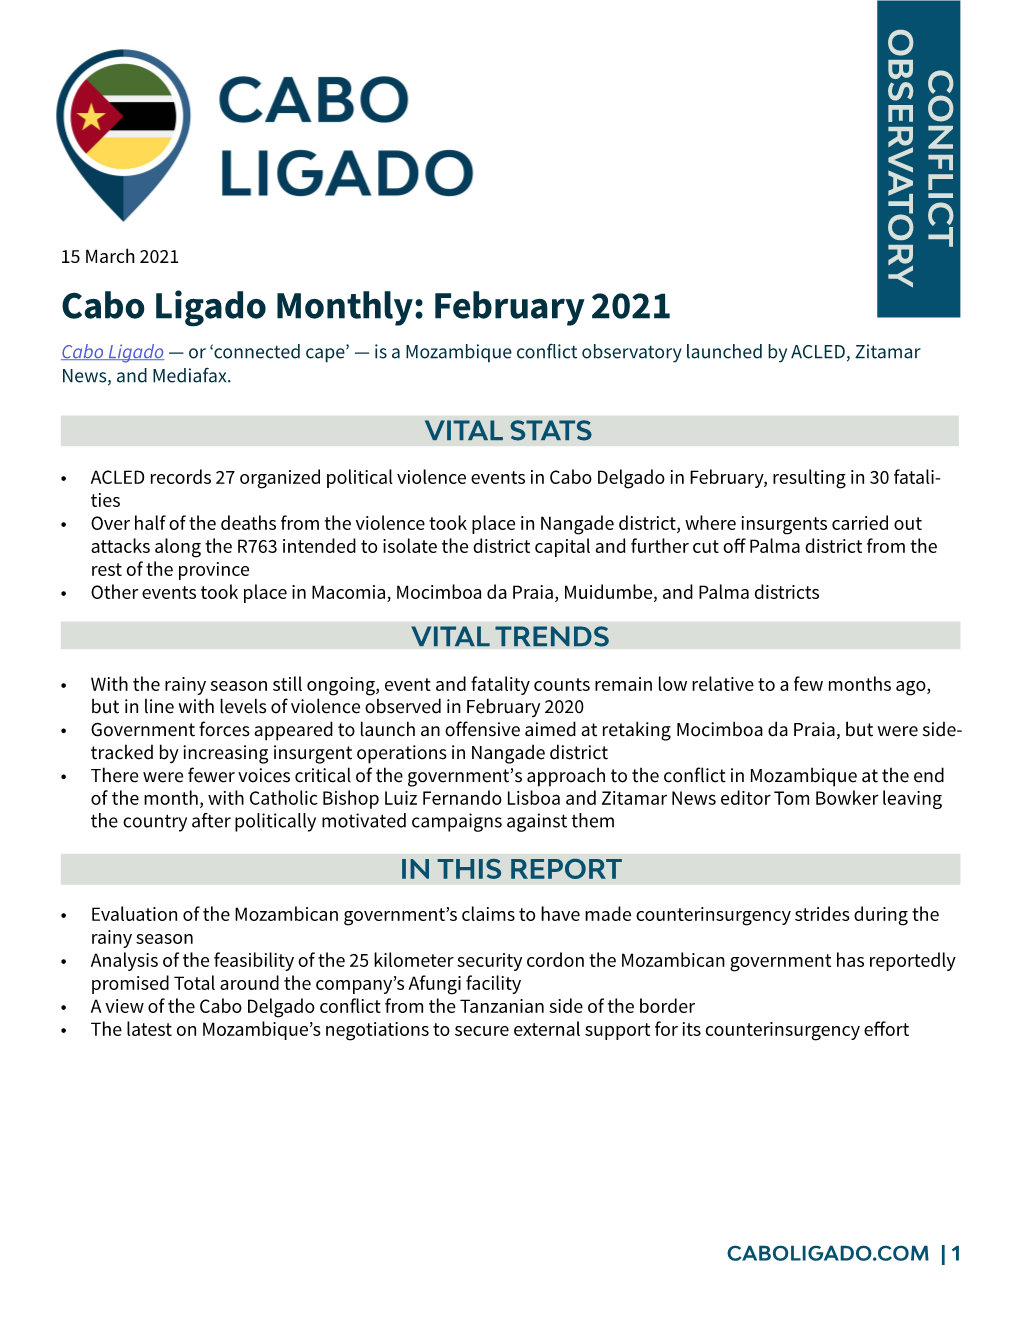 Cabo Ligado Monthly: February 2021 February Monthly: Ligado Cabo • • • • • Government • There • with • • • 15 March 2021 15 March FEBRUARY SITUATION SUMMARY